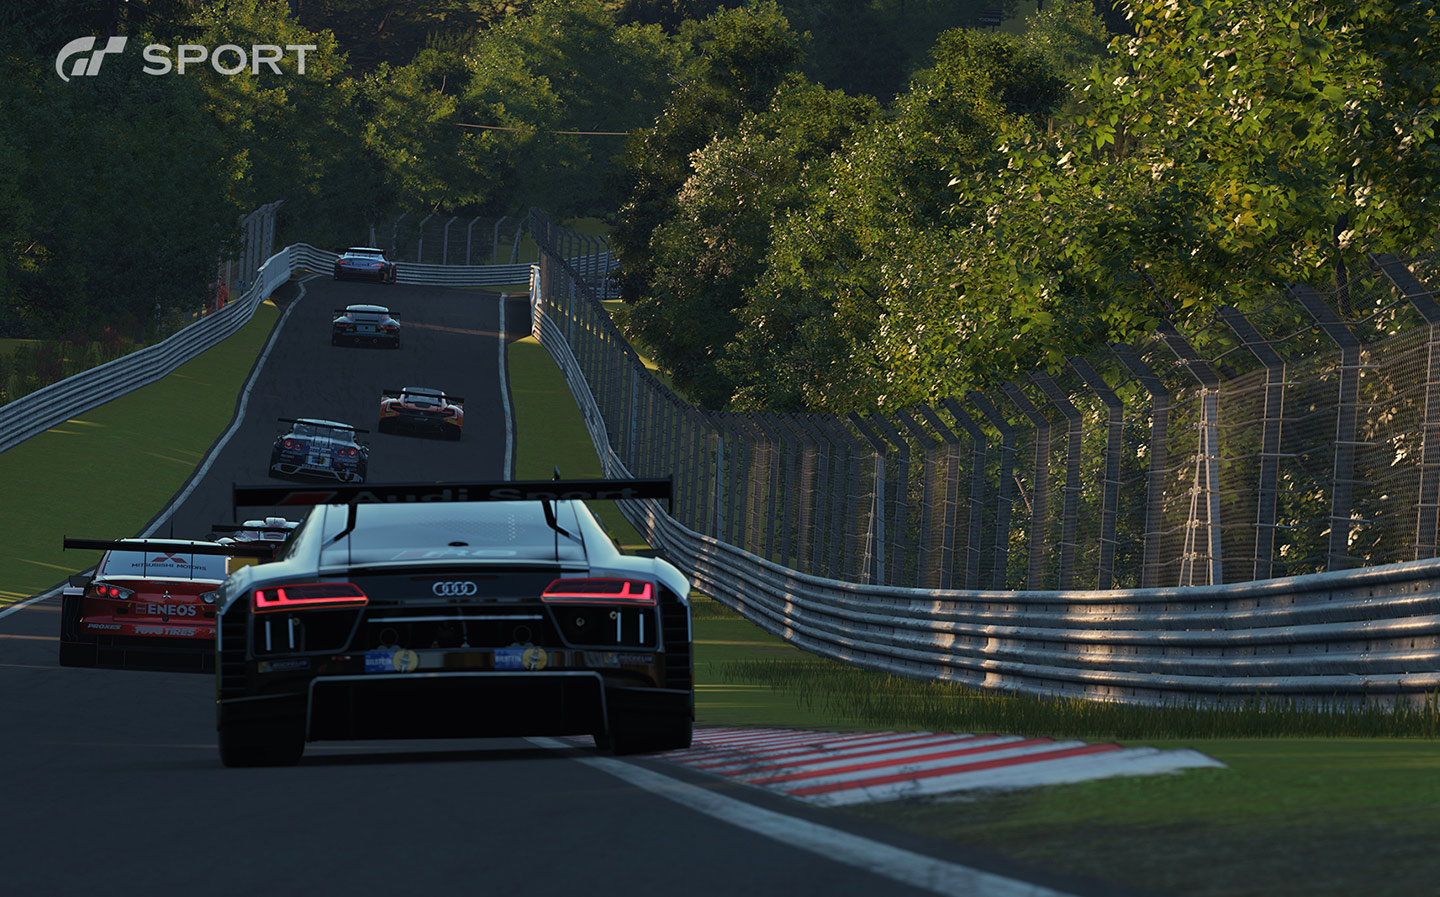 GT Sport REVIEW 2021, The Best Online Racing Game?